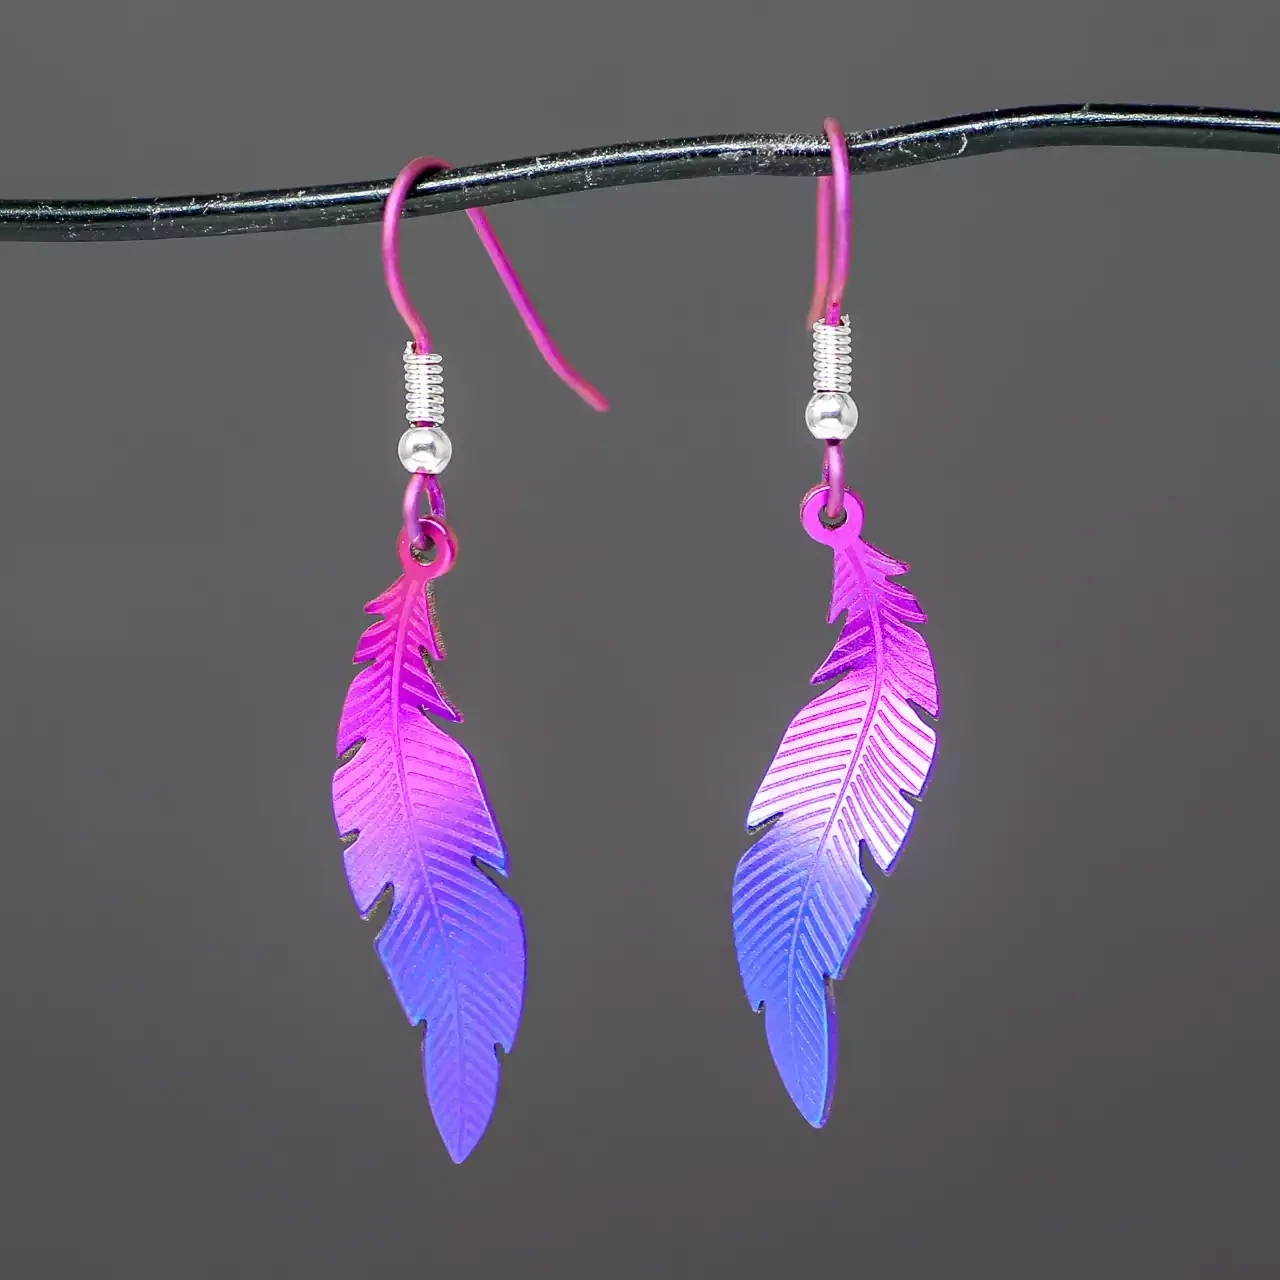 Titanium Feather Drop Earrings - Small - Purple by Prism Design